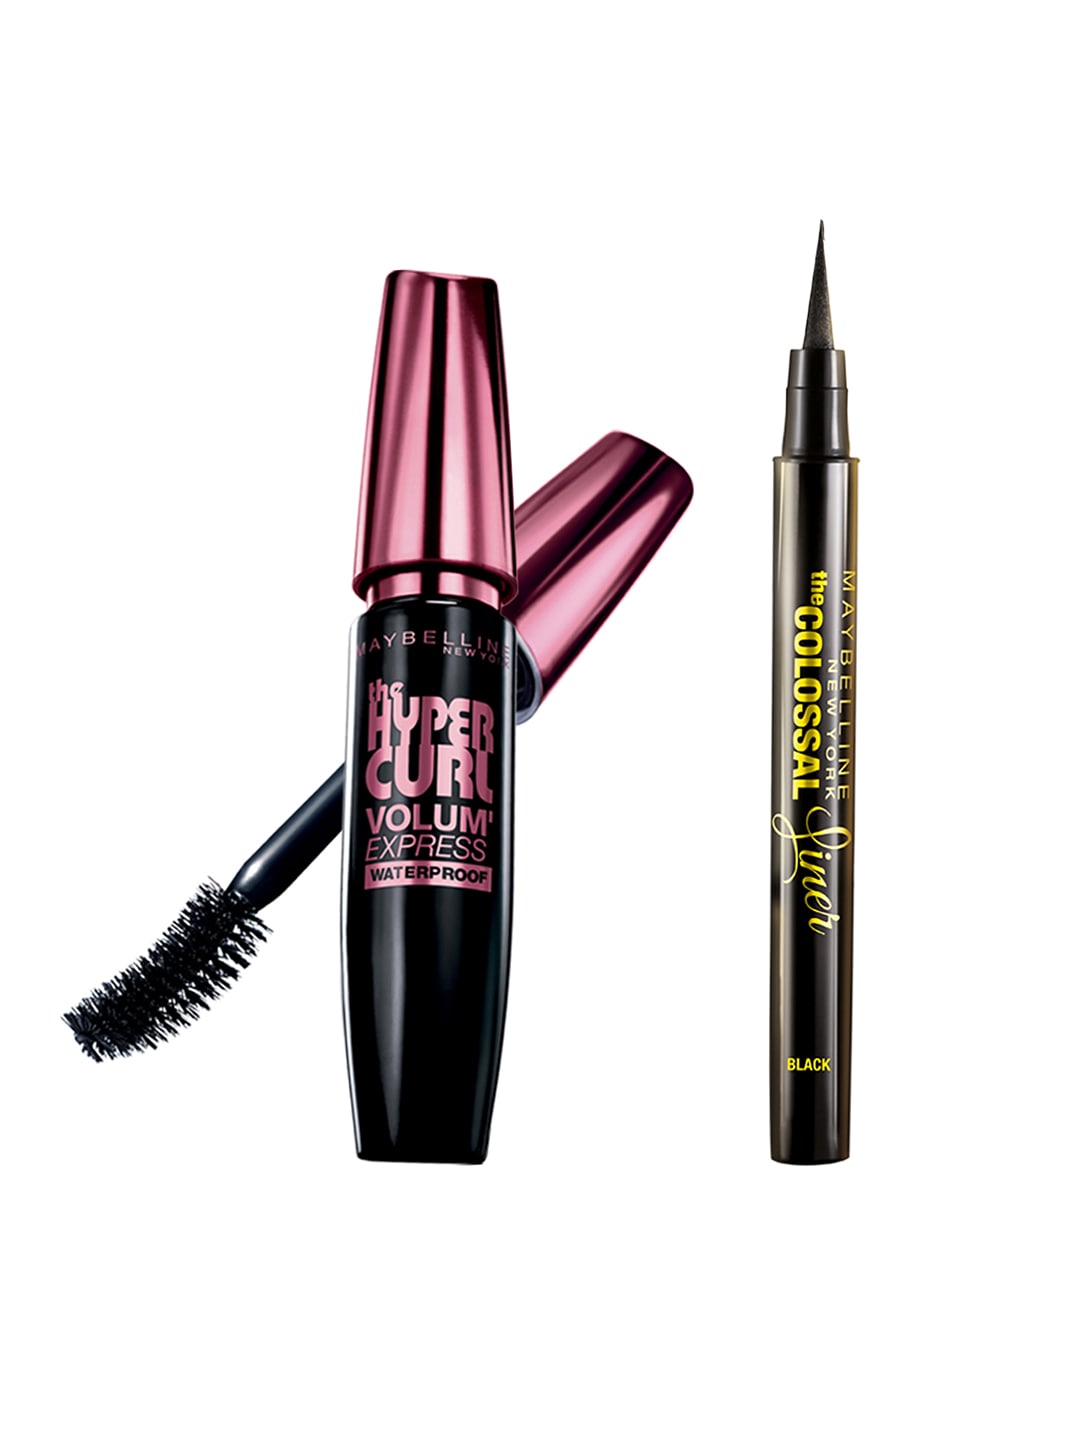 Maybelline New York Set of Liner & Mascara Price in India